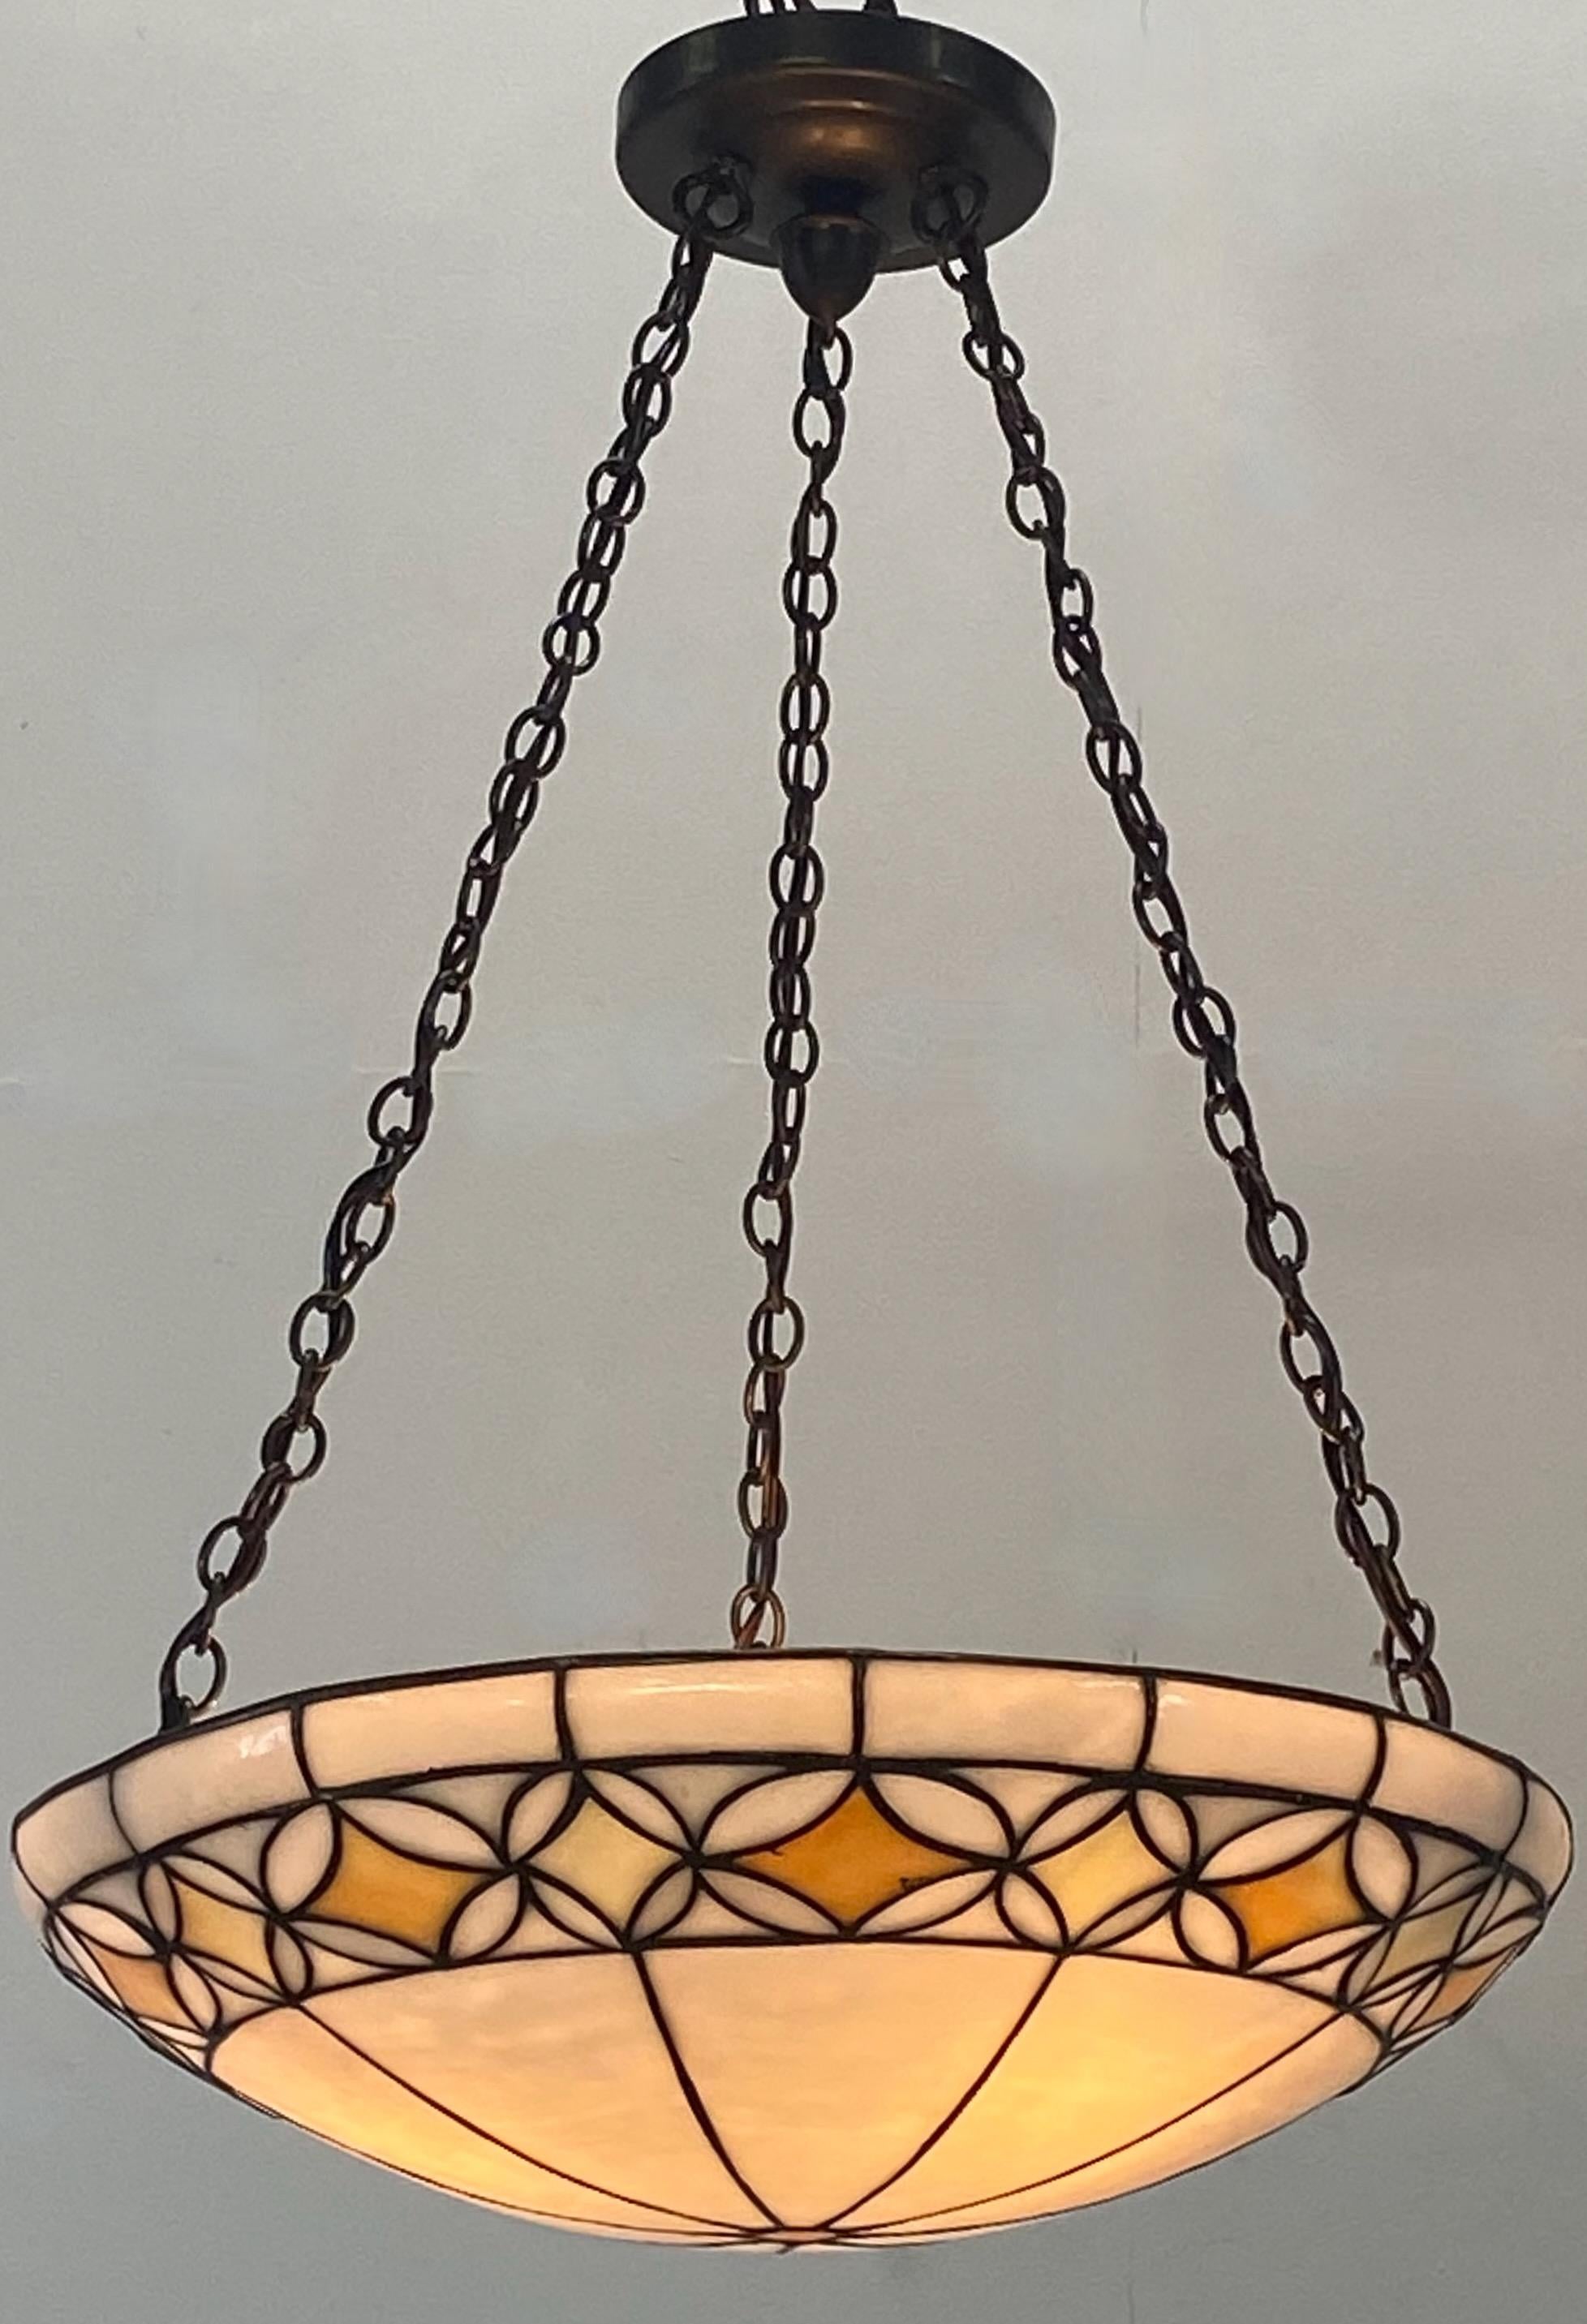 Antique Arts & Crafts style leaded glass hanging pendant light fixture.
Recently re-wired with new light sockets, holds candelabra size bulbs, ready to install.
In excellent condition.
American, early 20th century, 1905-1920.
 